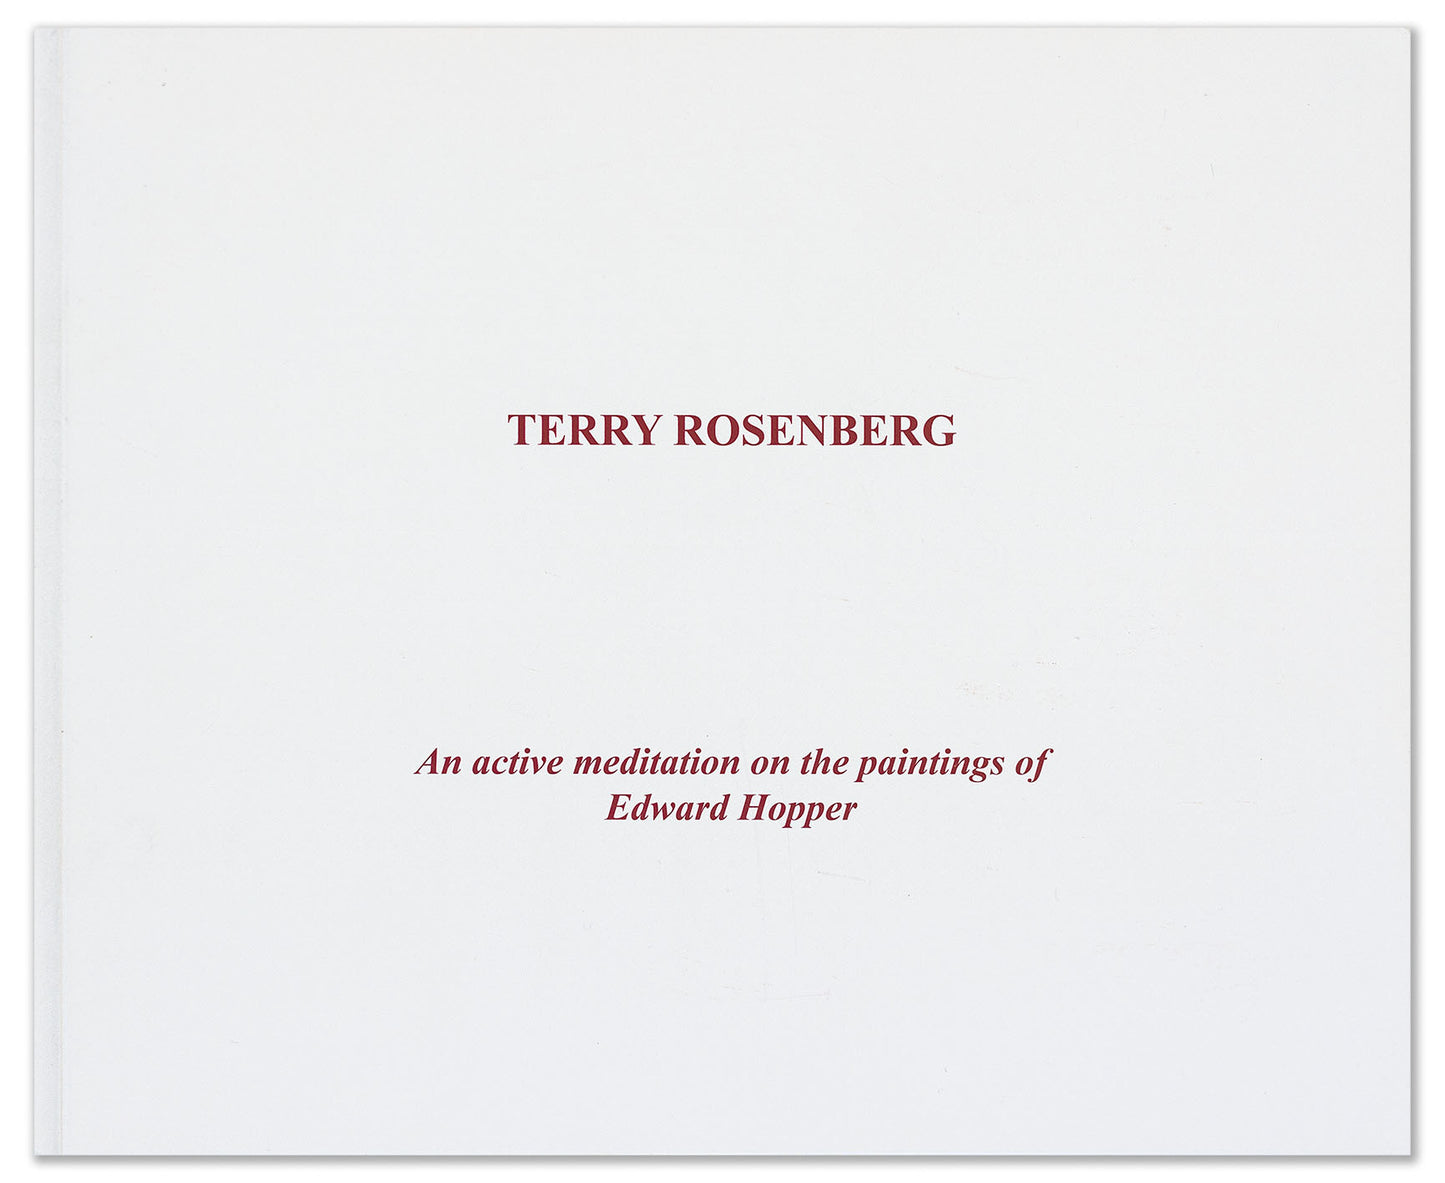 Terry Rosenberg: An active meditation on the paintings of Edward Hopper [softcover]